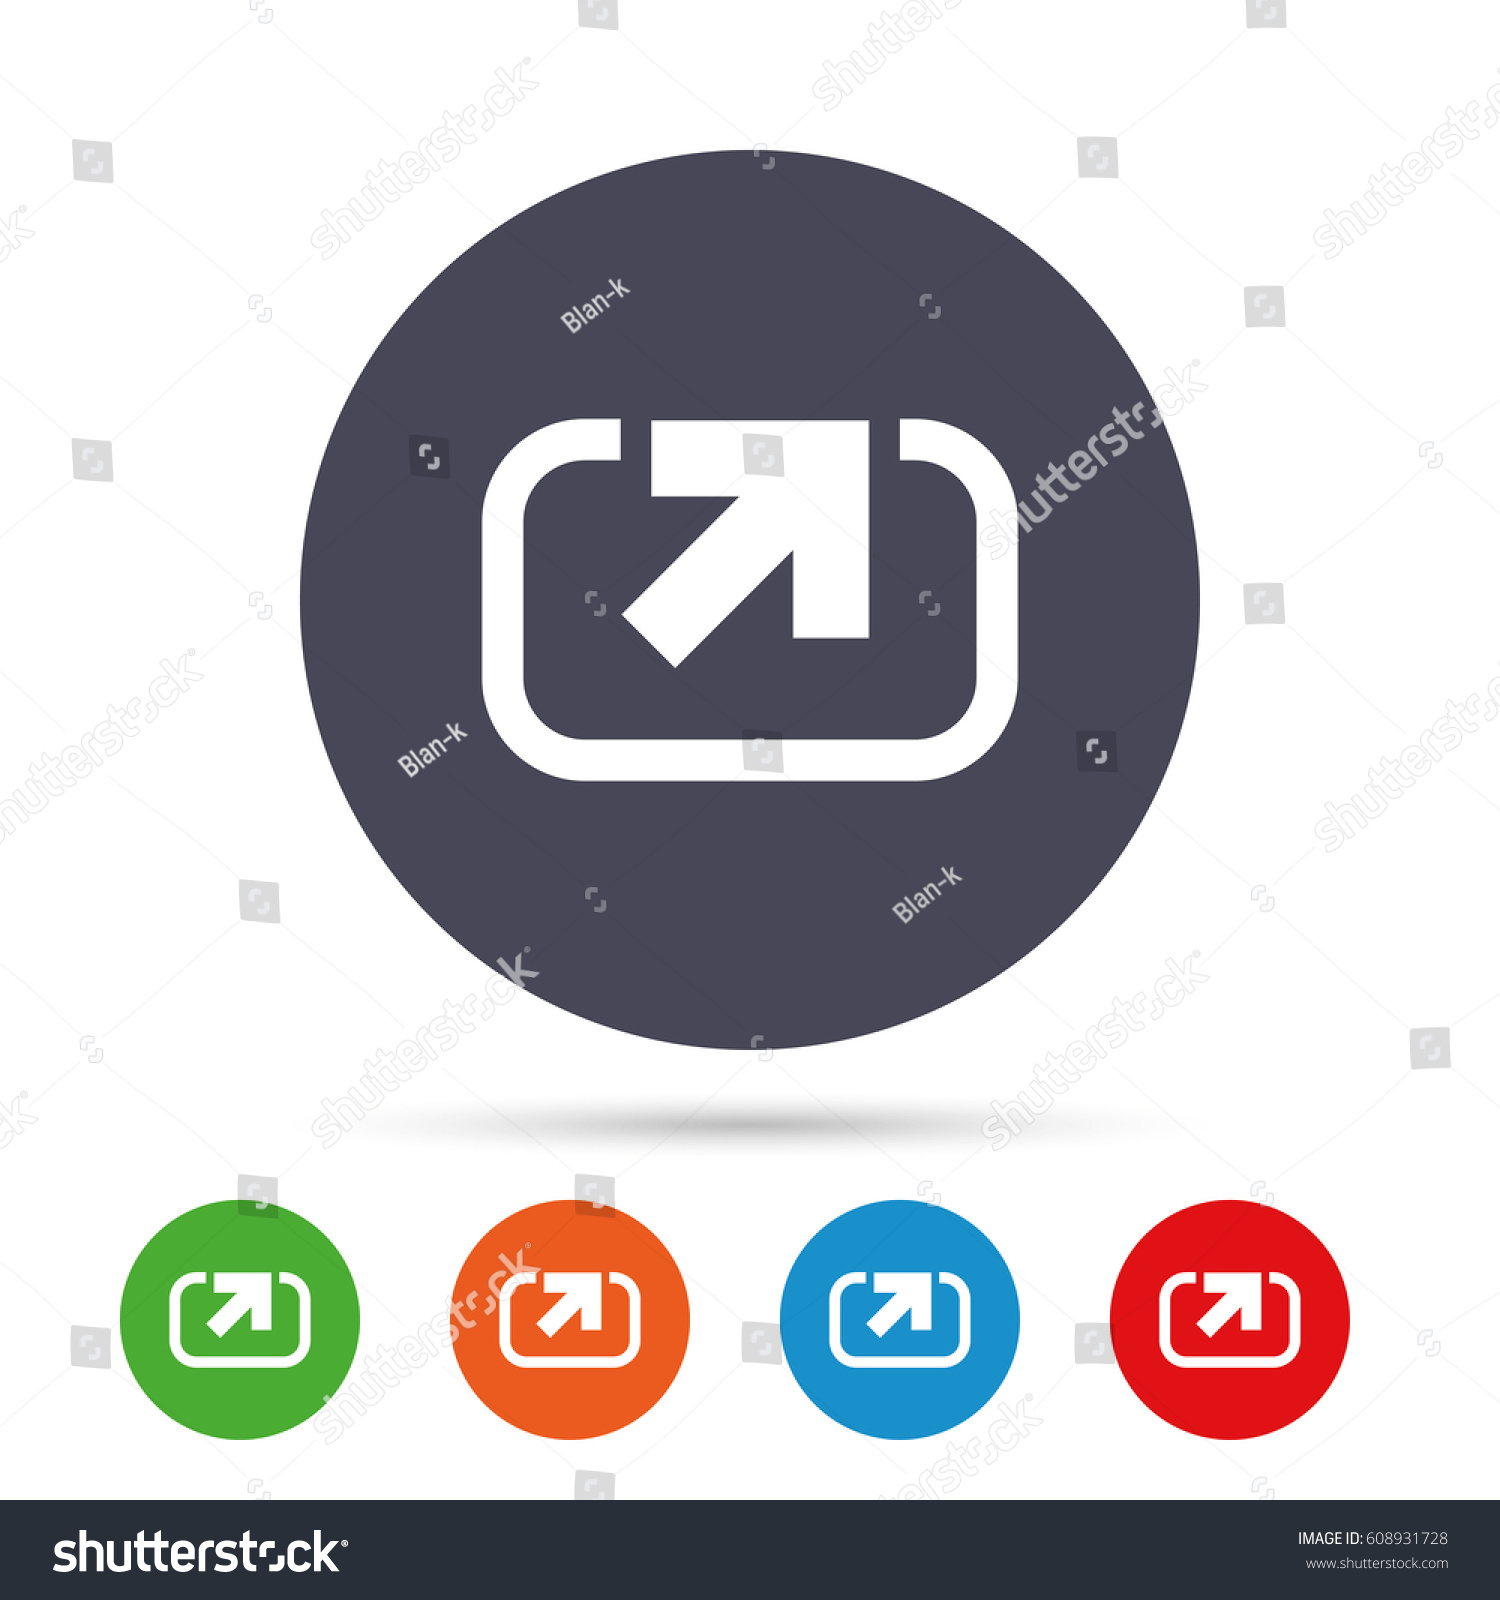 Action sign icon. Share symbol. Round colourful - Royalty Free Stock ...